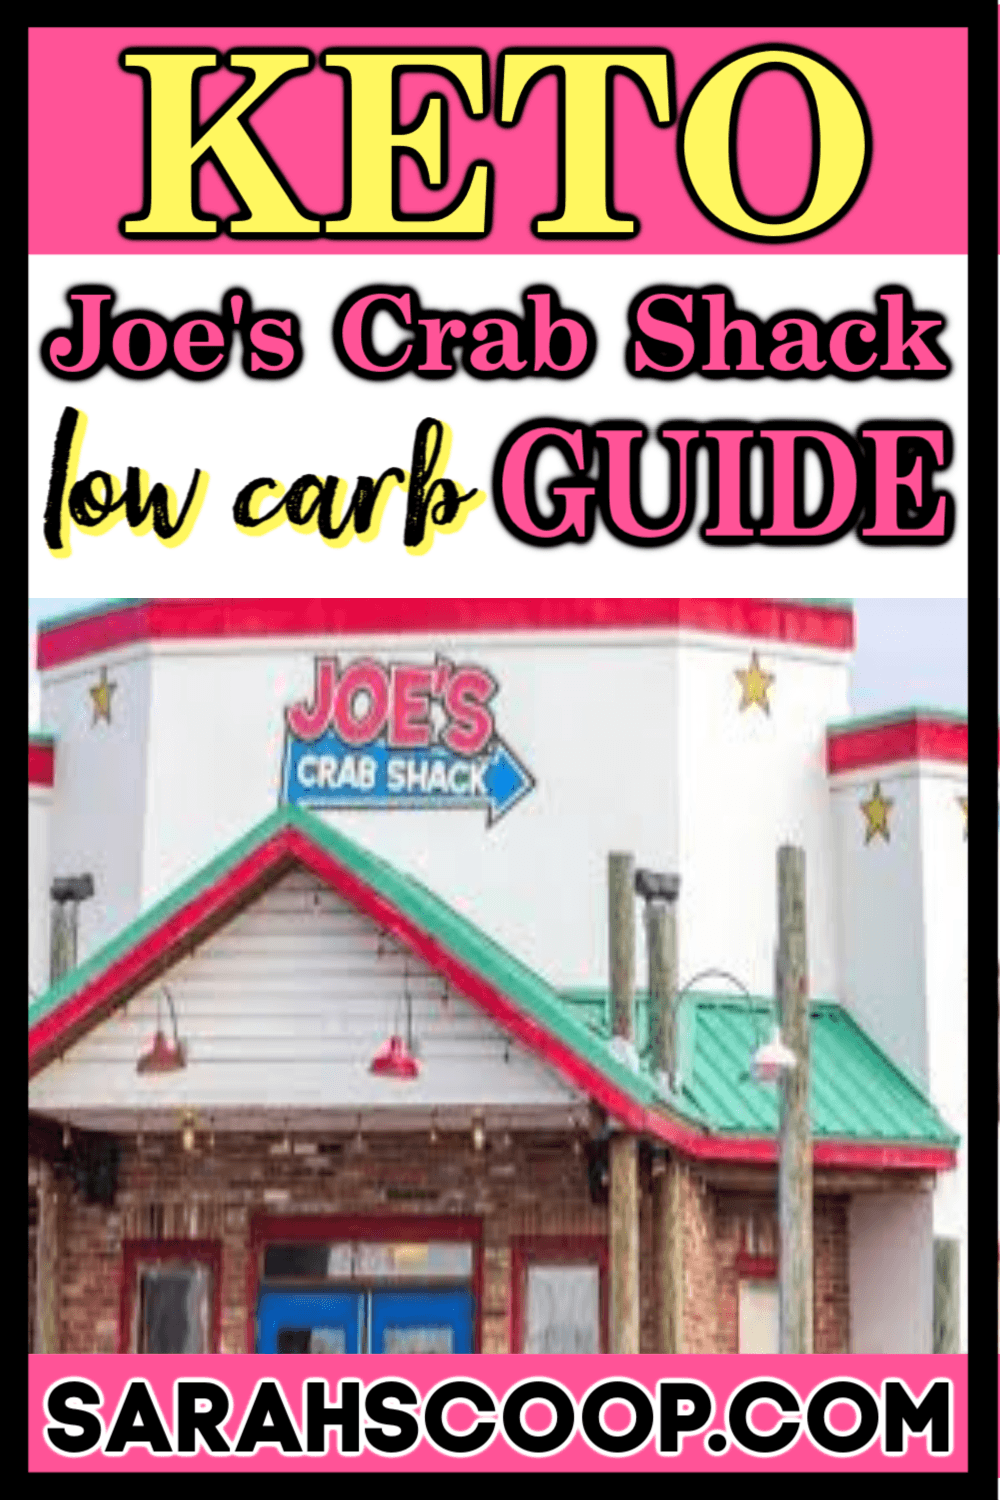 Low carb restaurant guide for Keto-friendly options at Joe's Crab Shack.